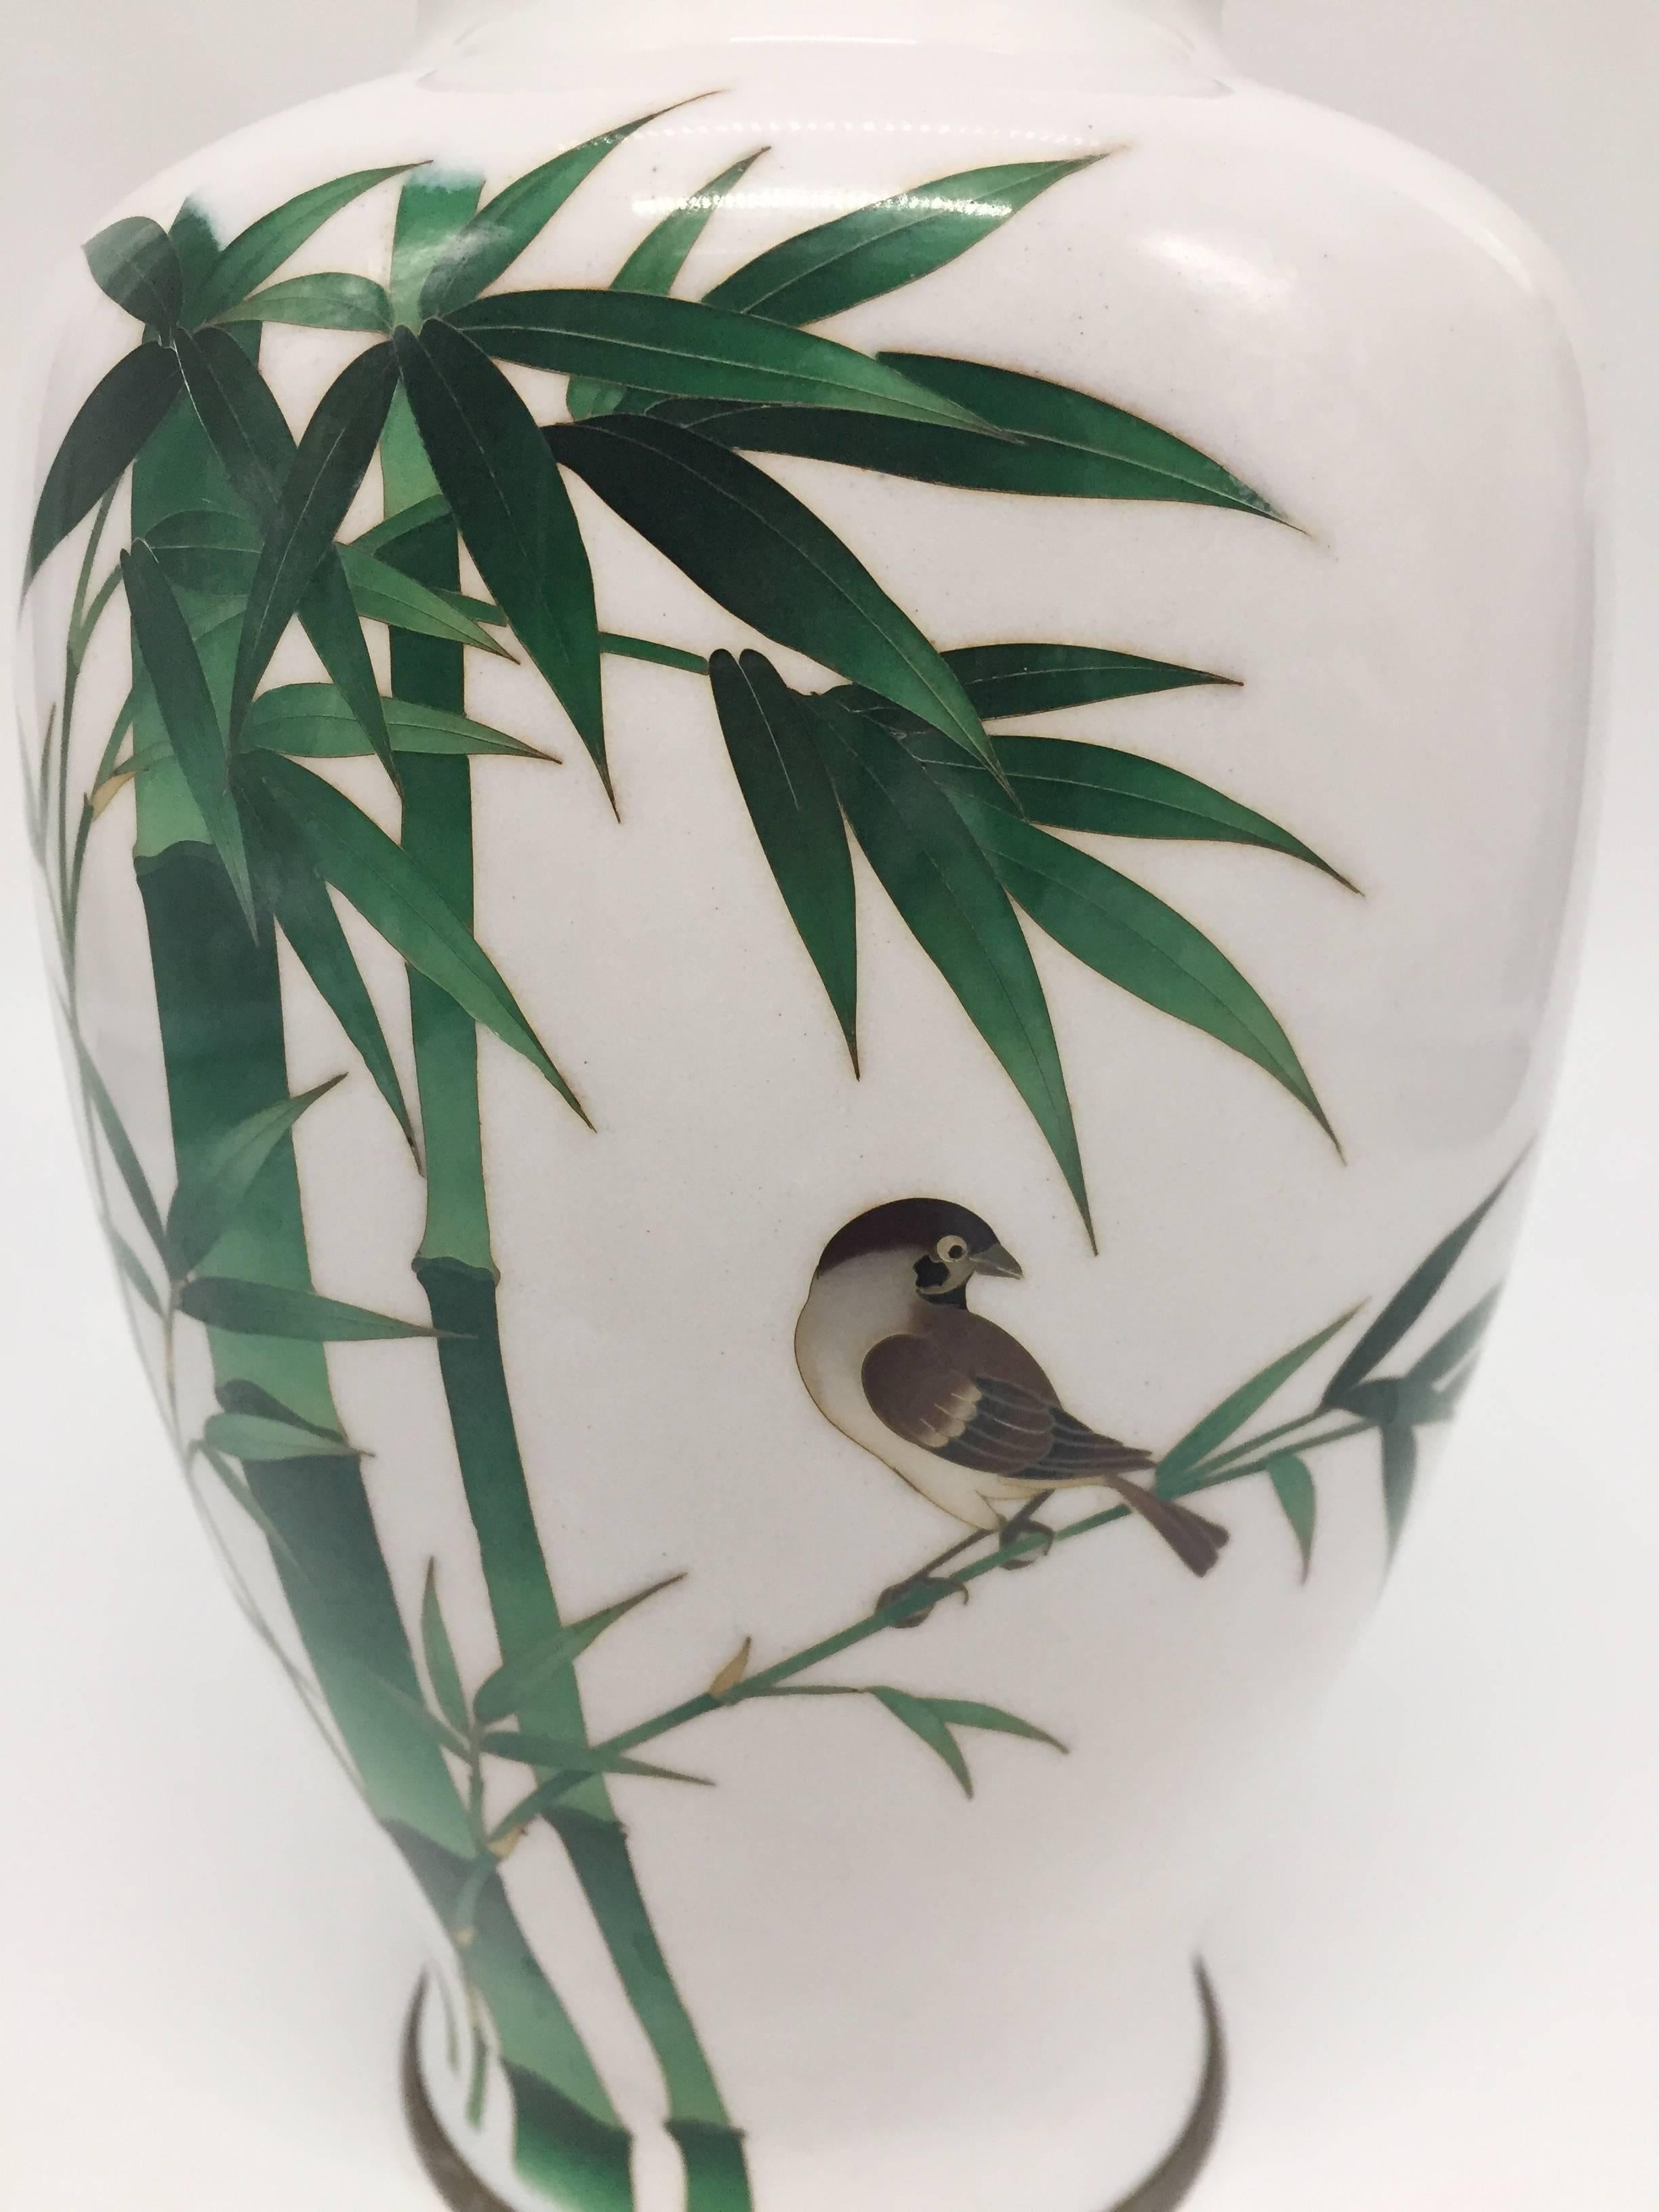 Beautiful vase in near perfect condition. Signed with the Ando mark at the base.

Featuring verdant green bamboo and a graceful bird, the vase has elegant lines, perfect proportions and the finest finish. The cloisonne work is understated and